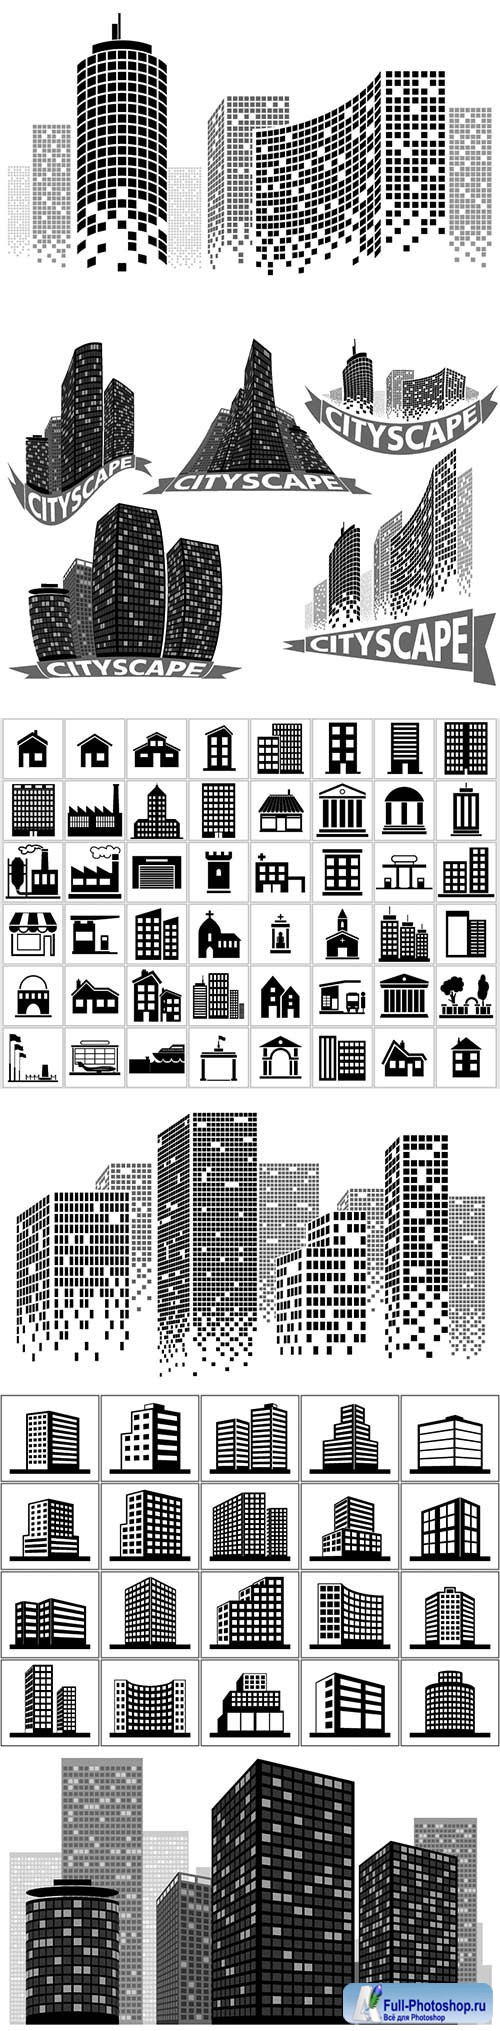 Cityscape set - buildings and city scene illustrations vector